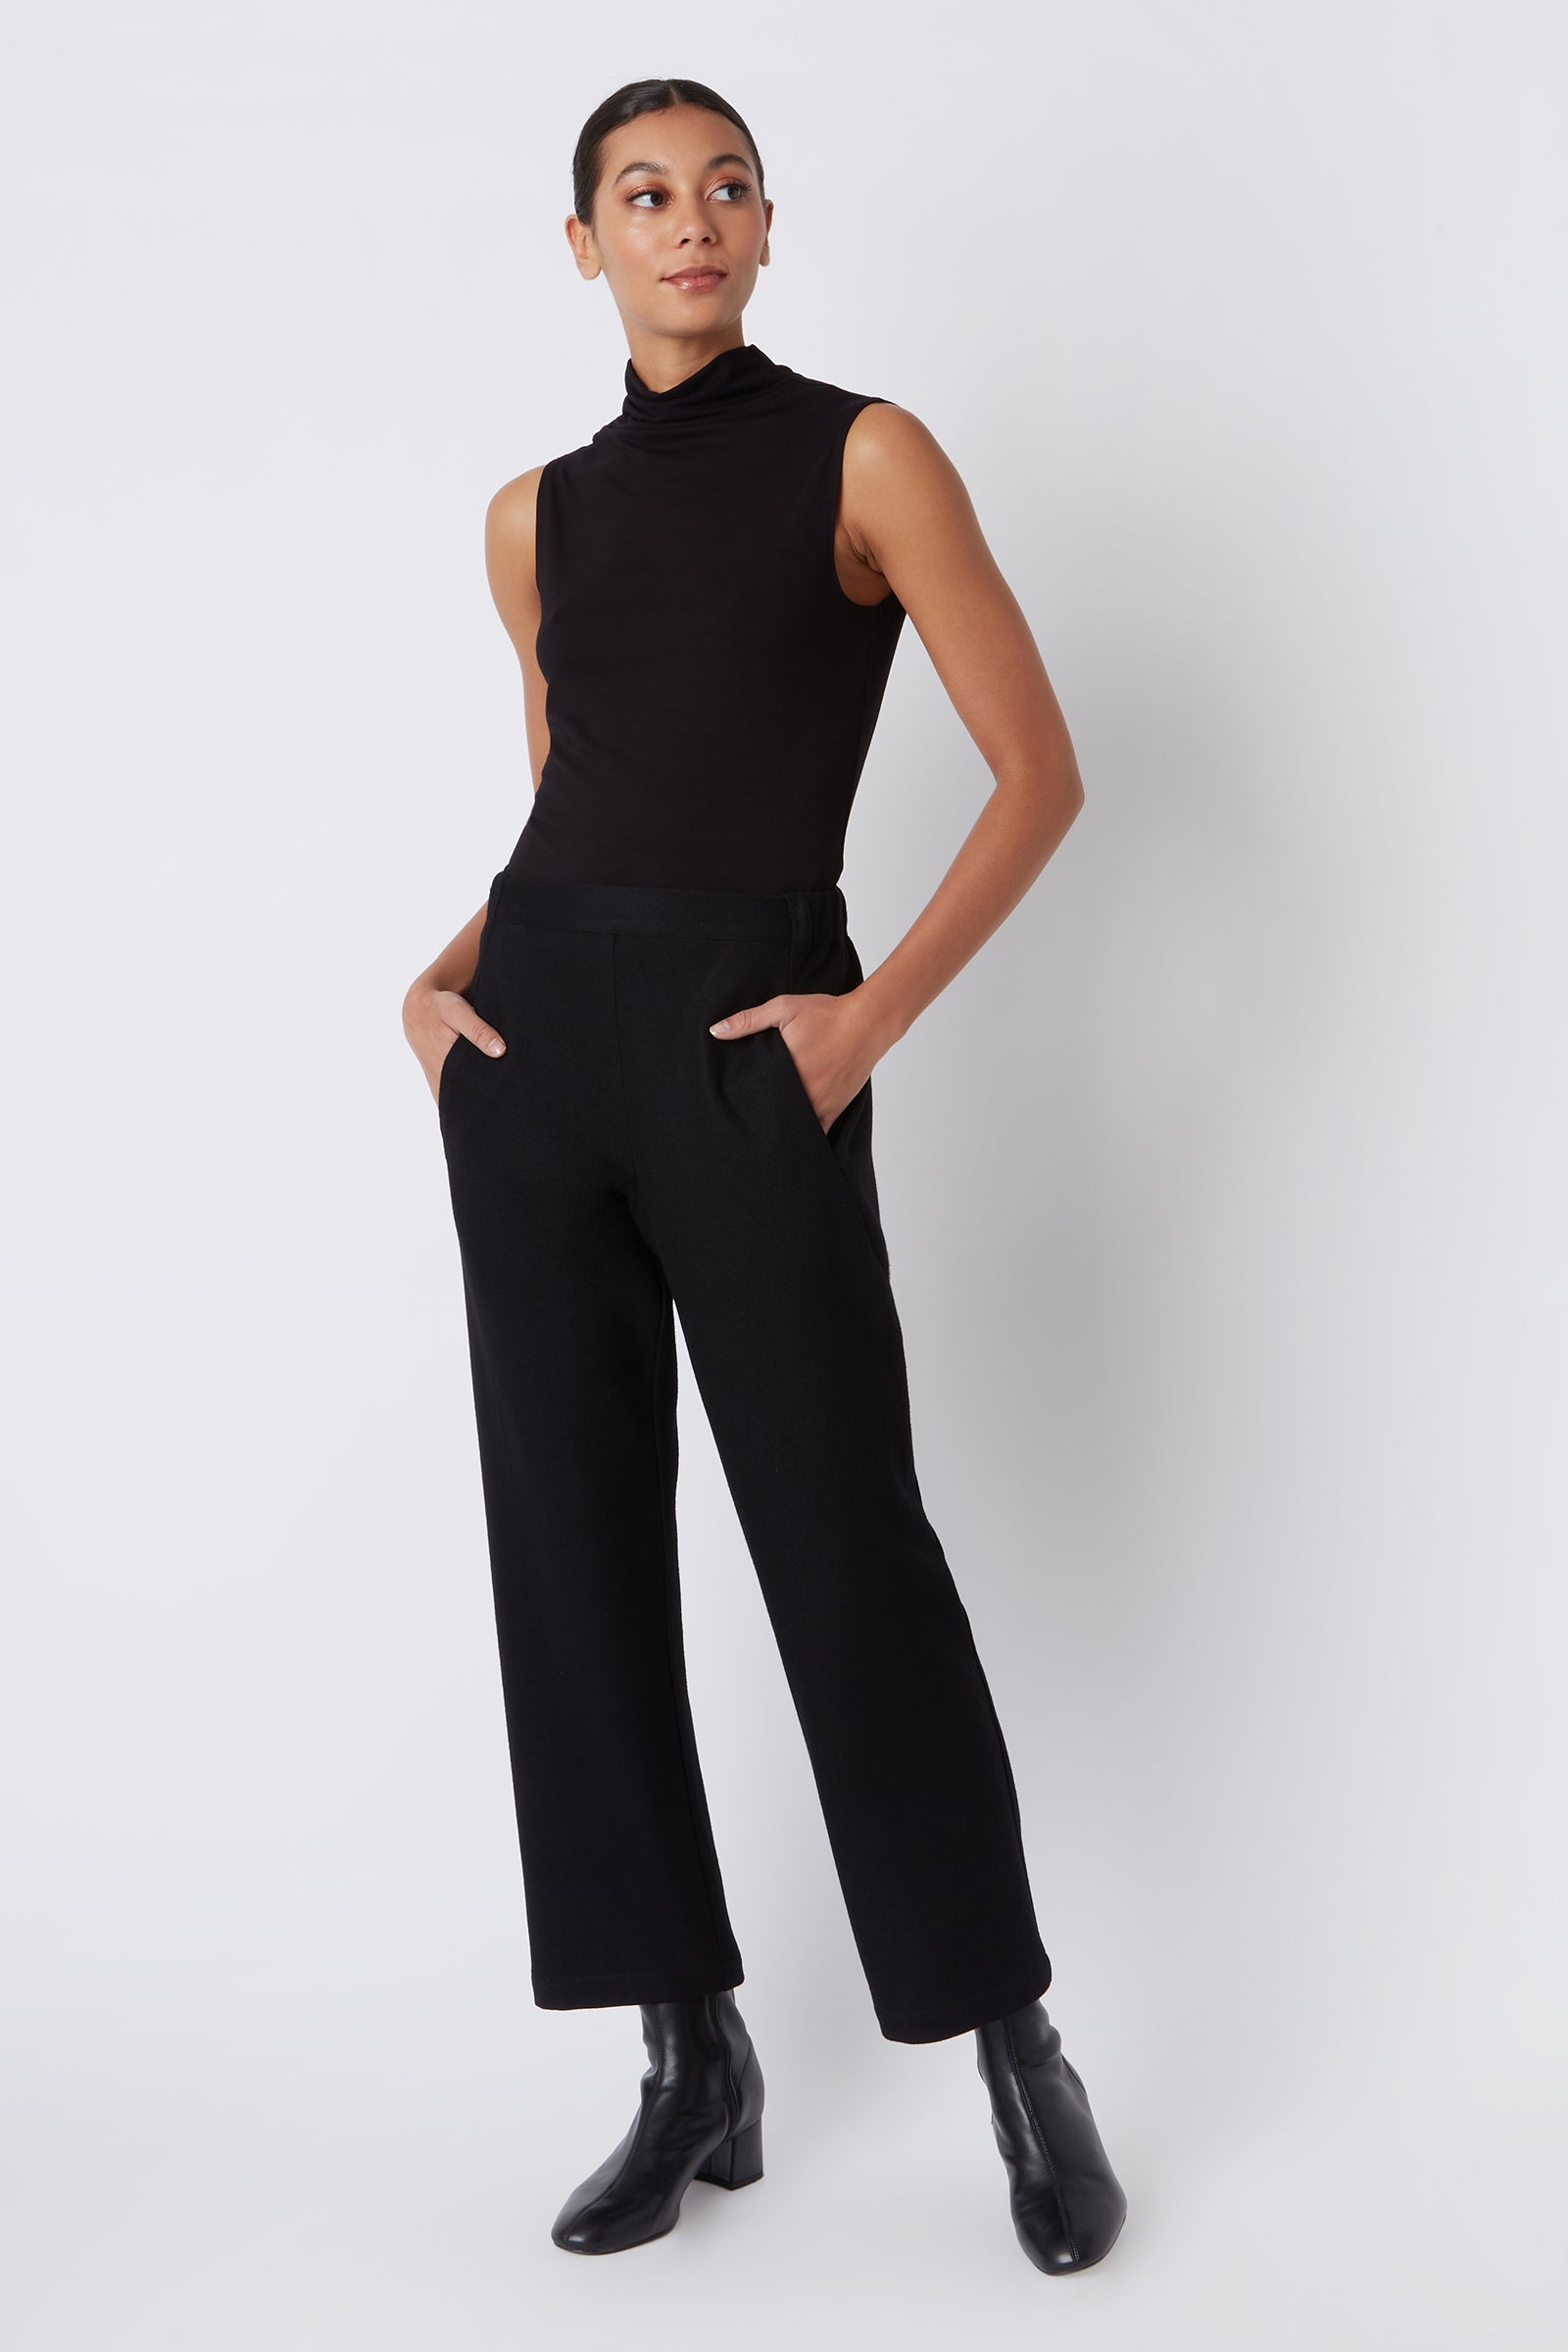 Kal Rieman Felted Jersey Angle Seam Crop Pant in Black Felted Jersey on Model Looking Left Full Front View